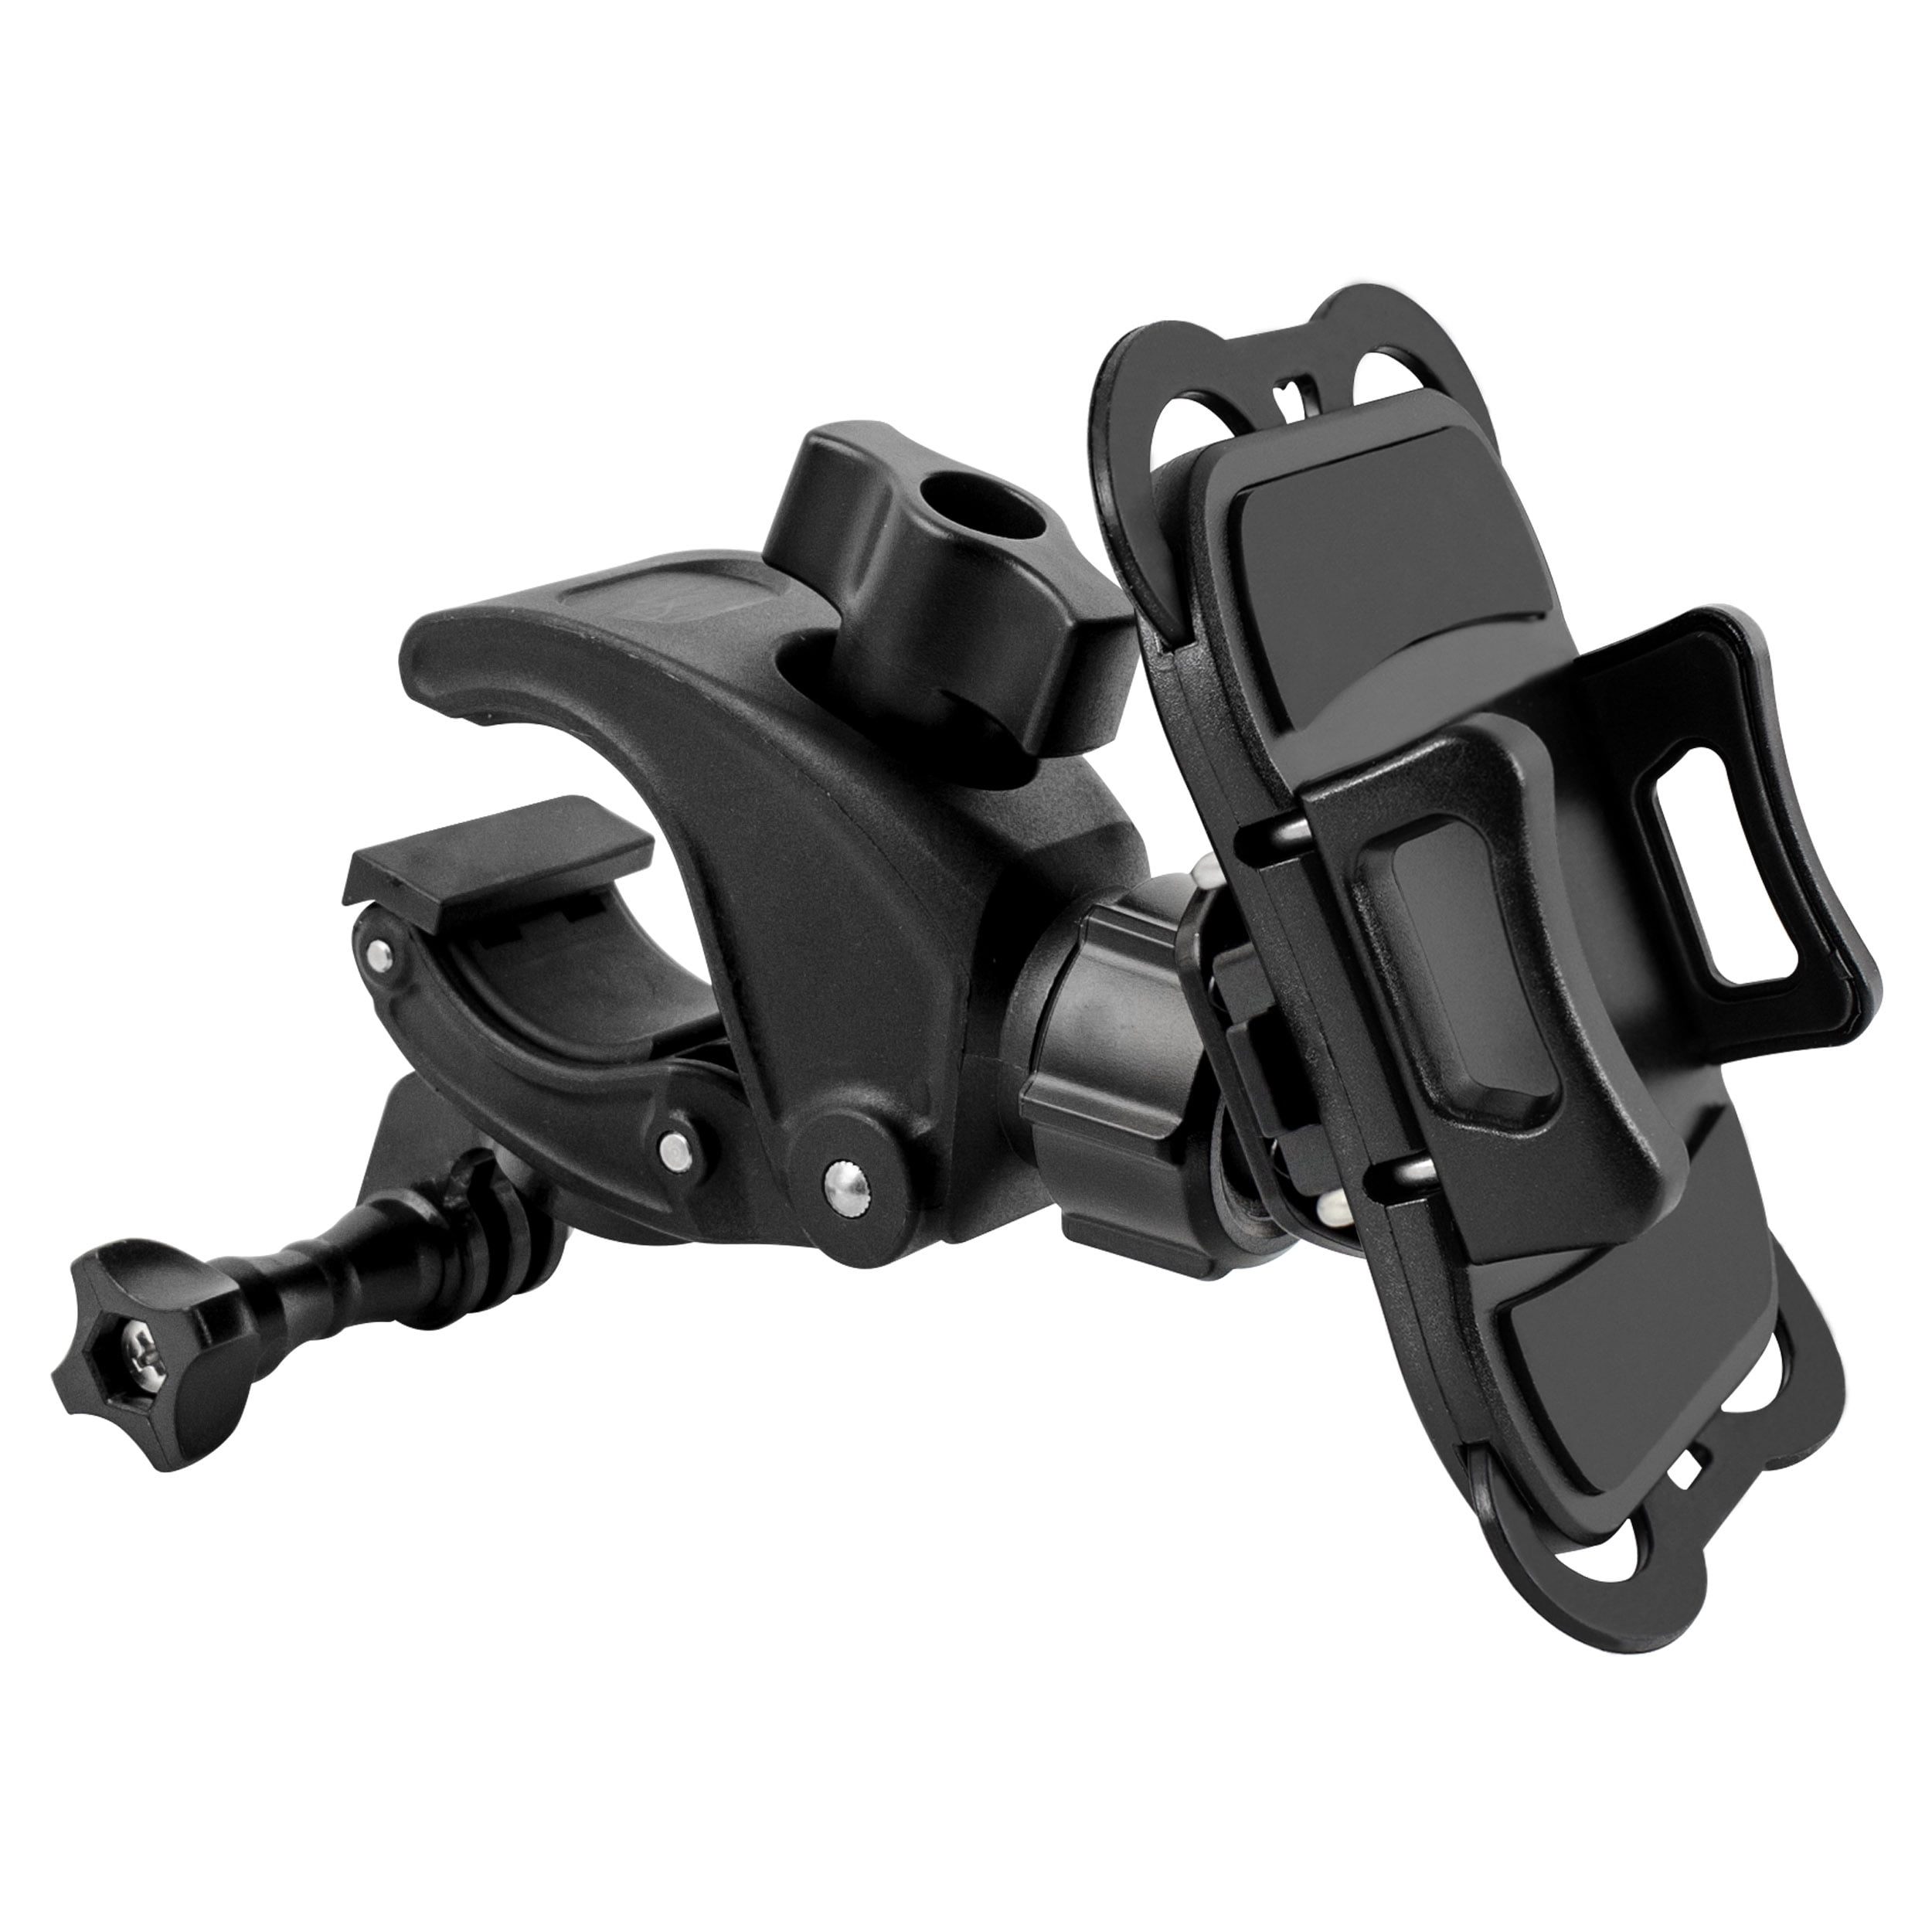 Custom Accessories Motorcycle/ATV Phone Holder and Action Camera Mount 18864W, Black